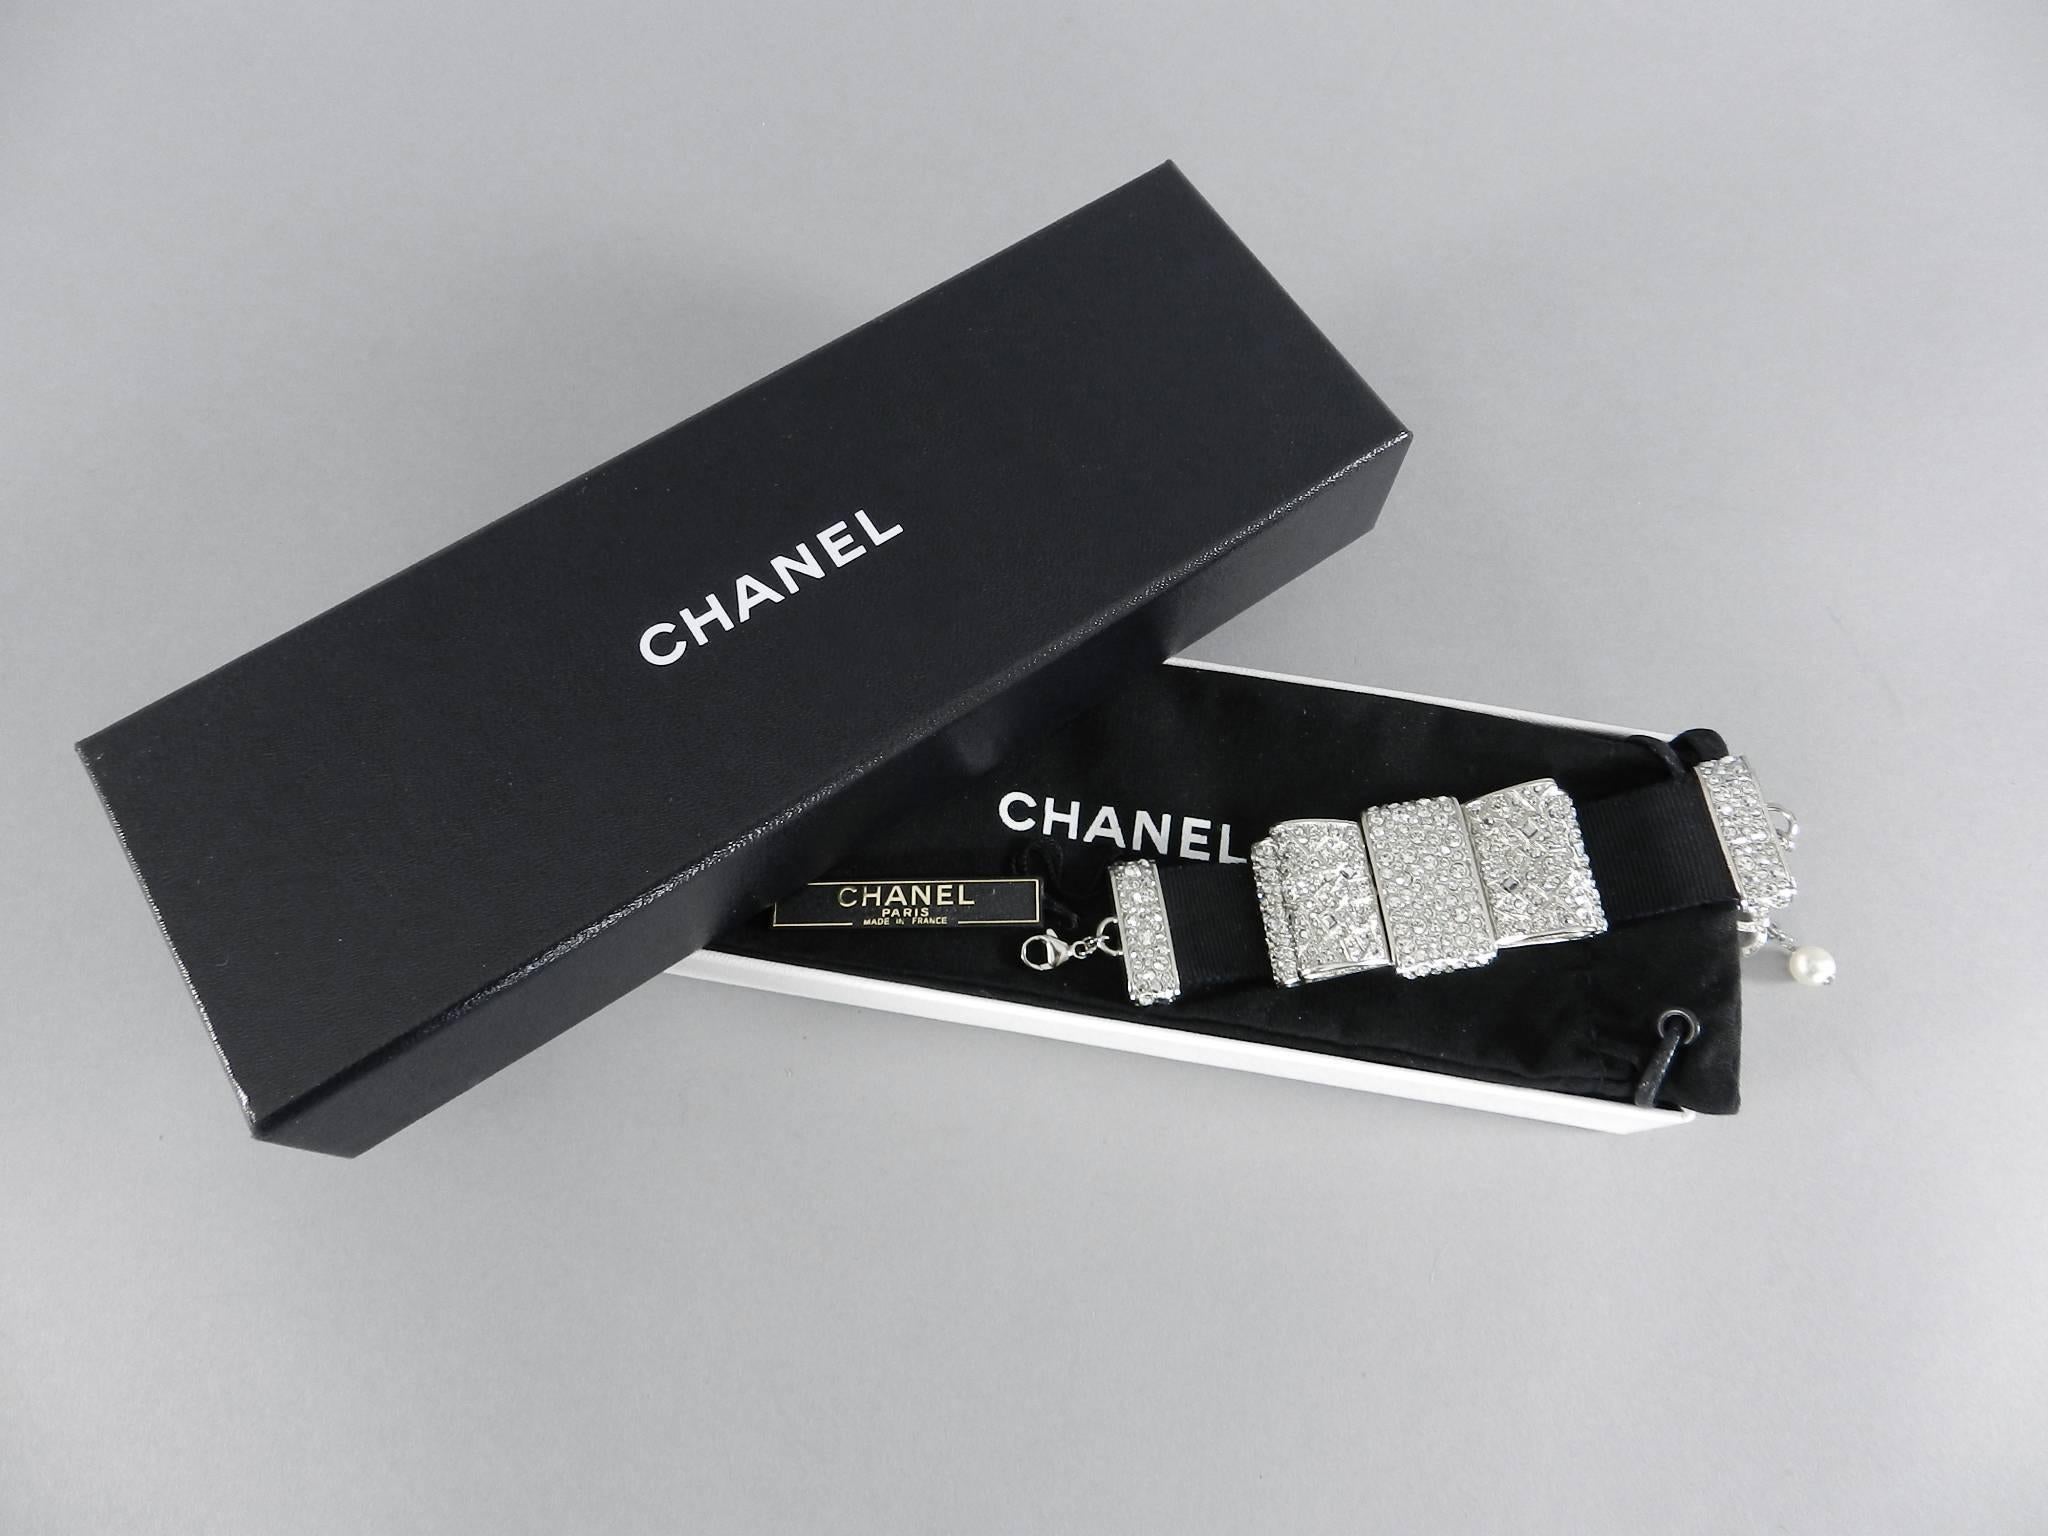 Chanel 13B Rhinestone Jewelled Bow Bracelet.  Silvertone metal with rhinestones on thick black grosgrain ribbon. Extender chain is finished with a jewelled cc charm and faux pearl drop. Excellent pre-owned condition. Includes duster, box, and